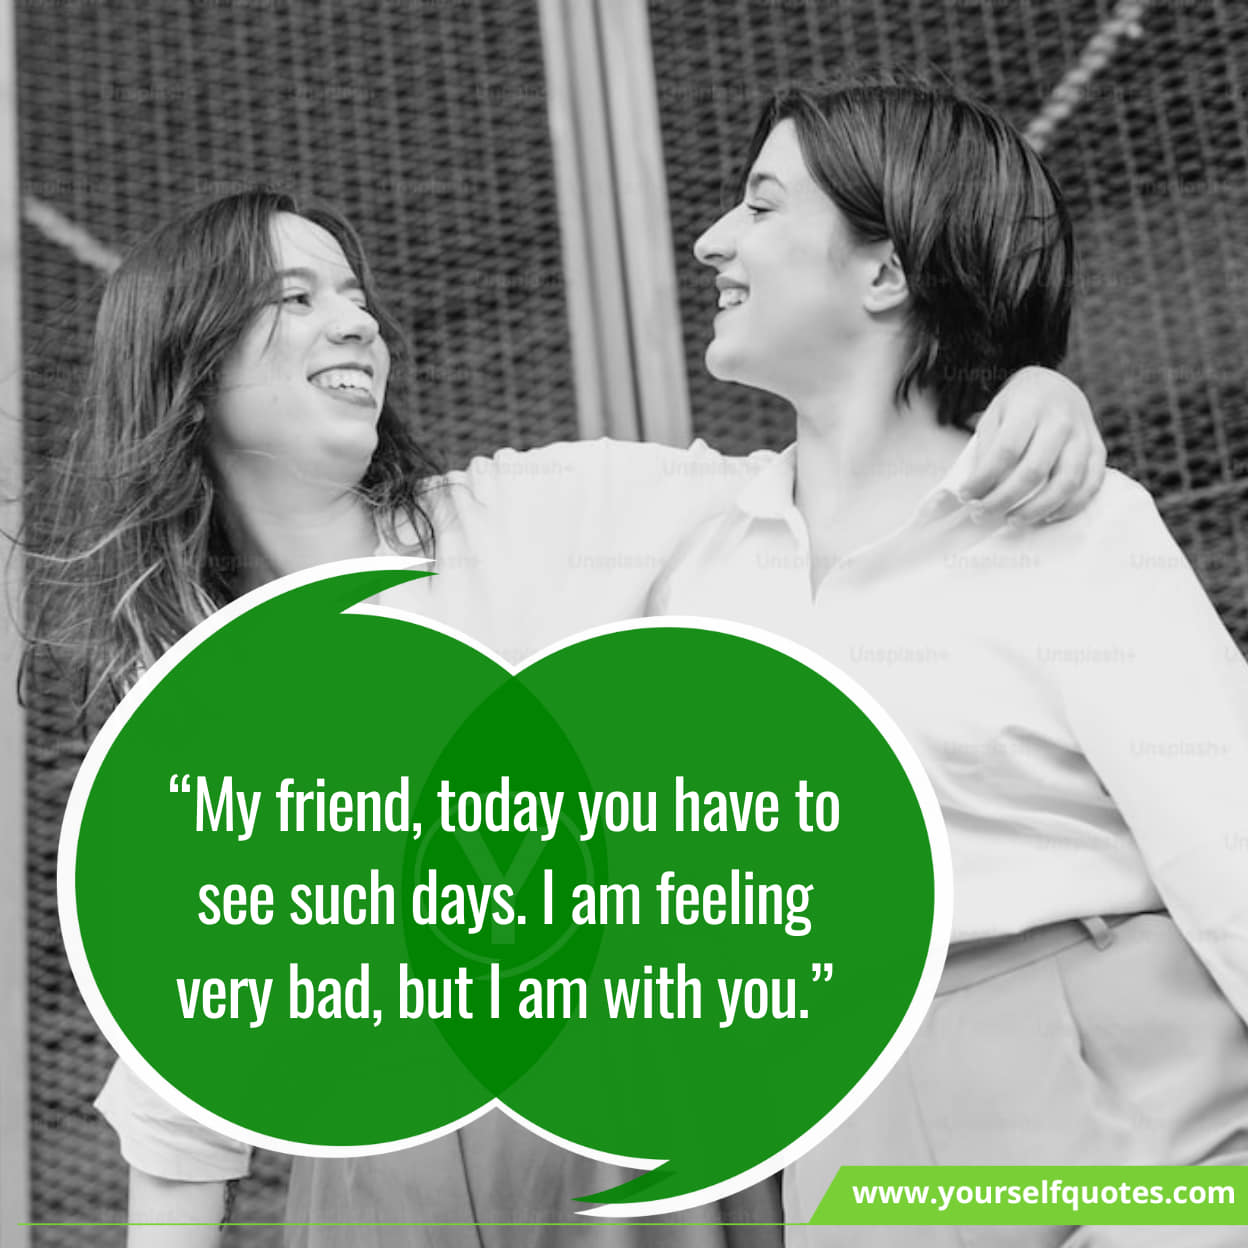 Friendship Care Messages for Your Well-being